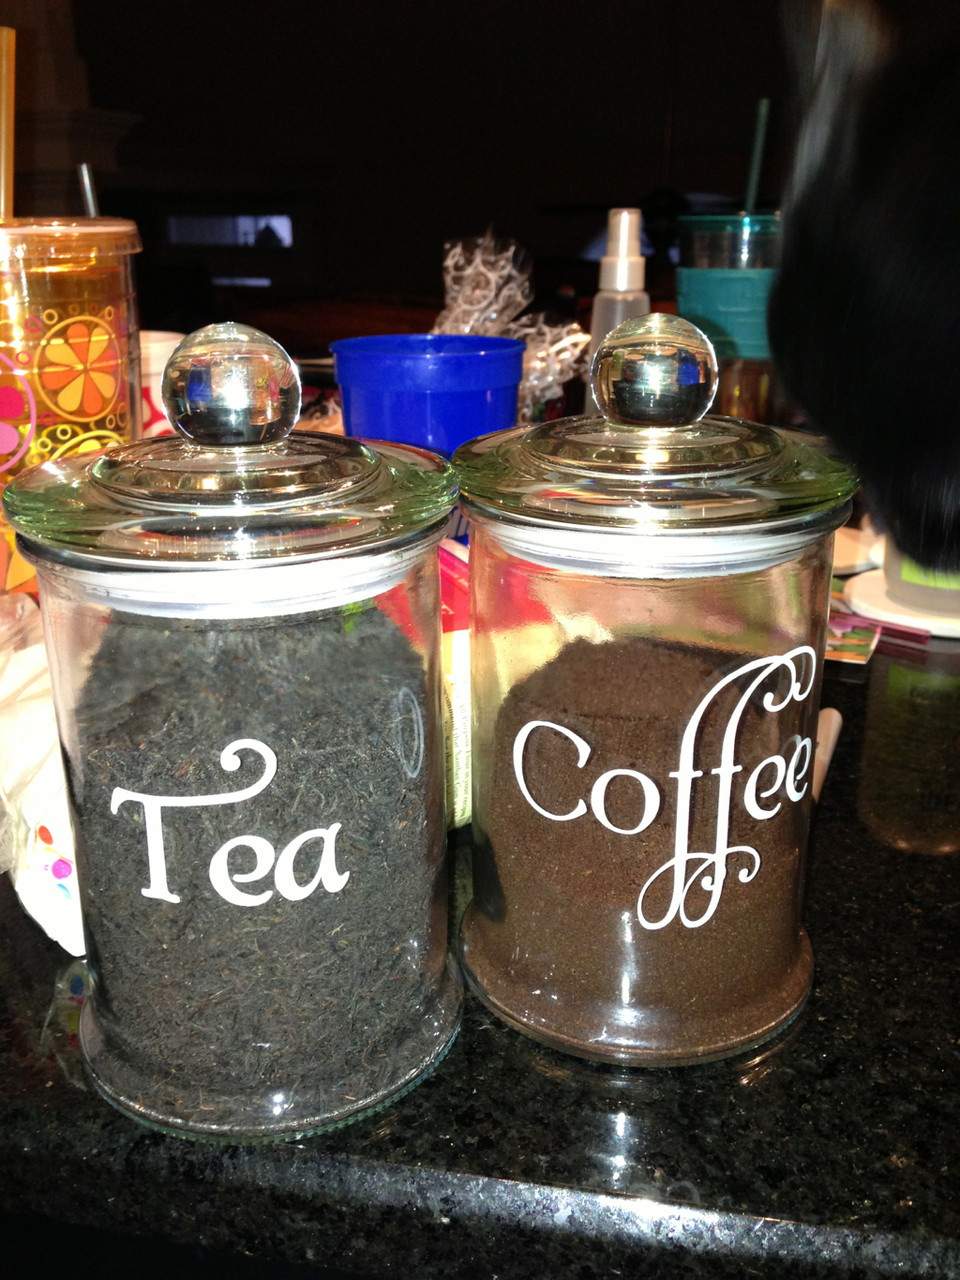 Set of 3 Canister Labels, Decals, Sugar Flour and Tea, Pantry